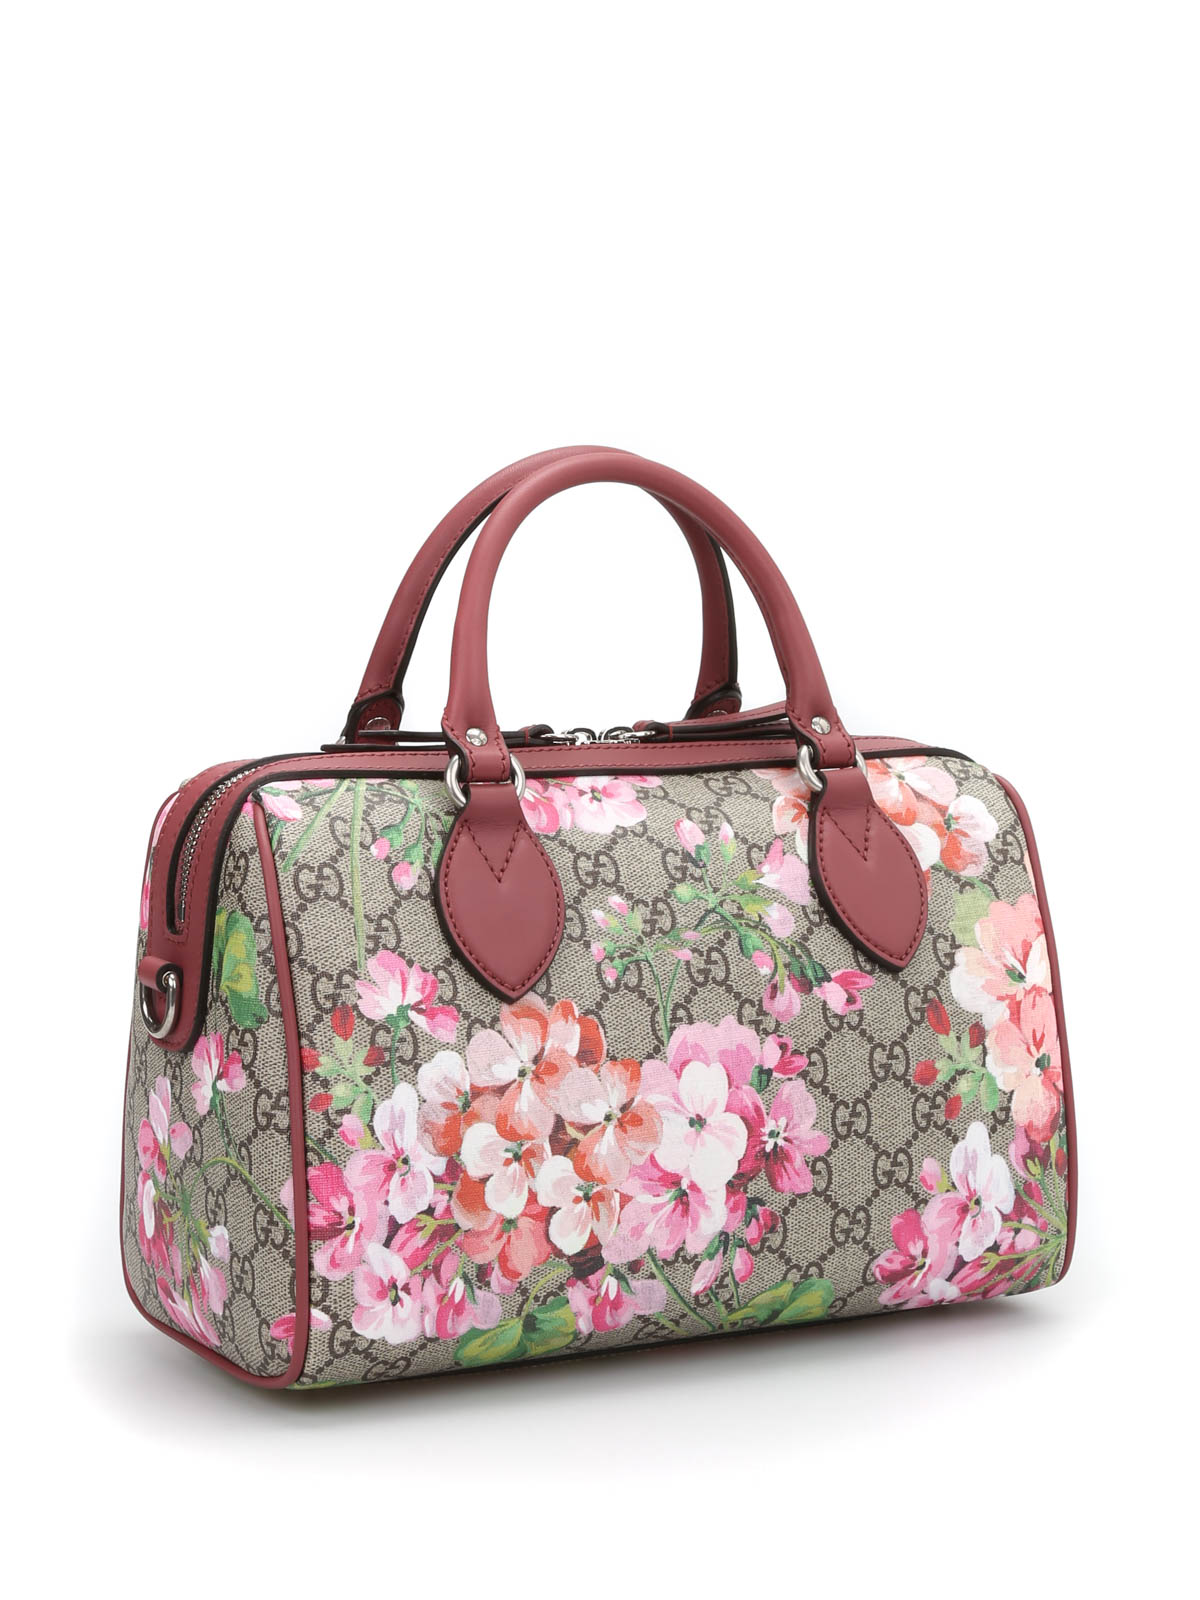 Blooms GG Supreme top handle bag by Gucci - bowling bags | Shop online at 0